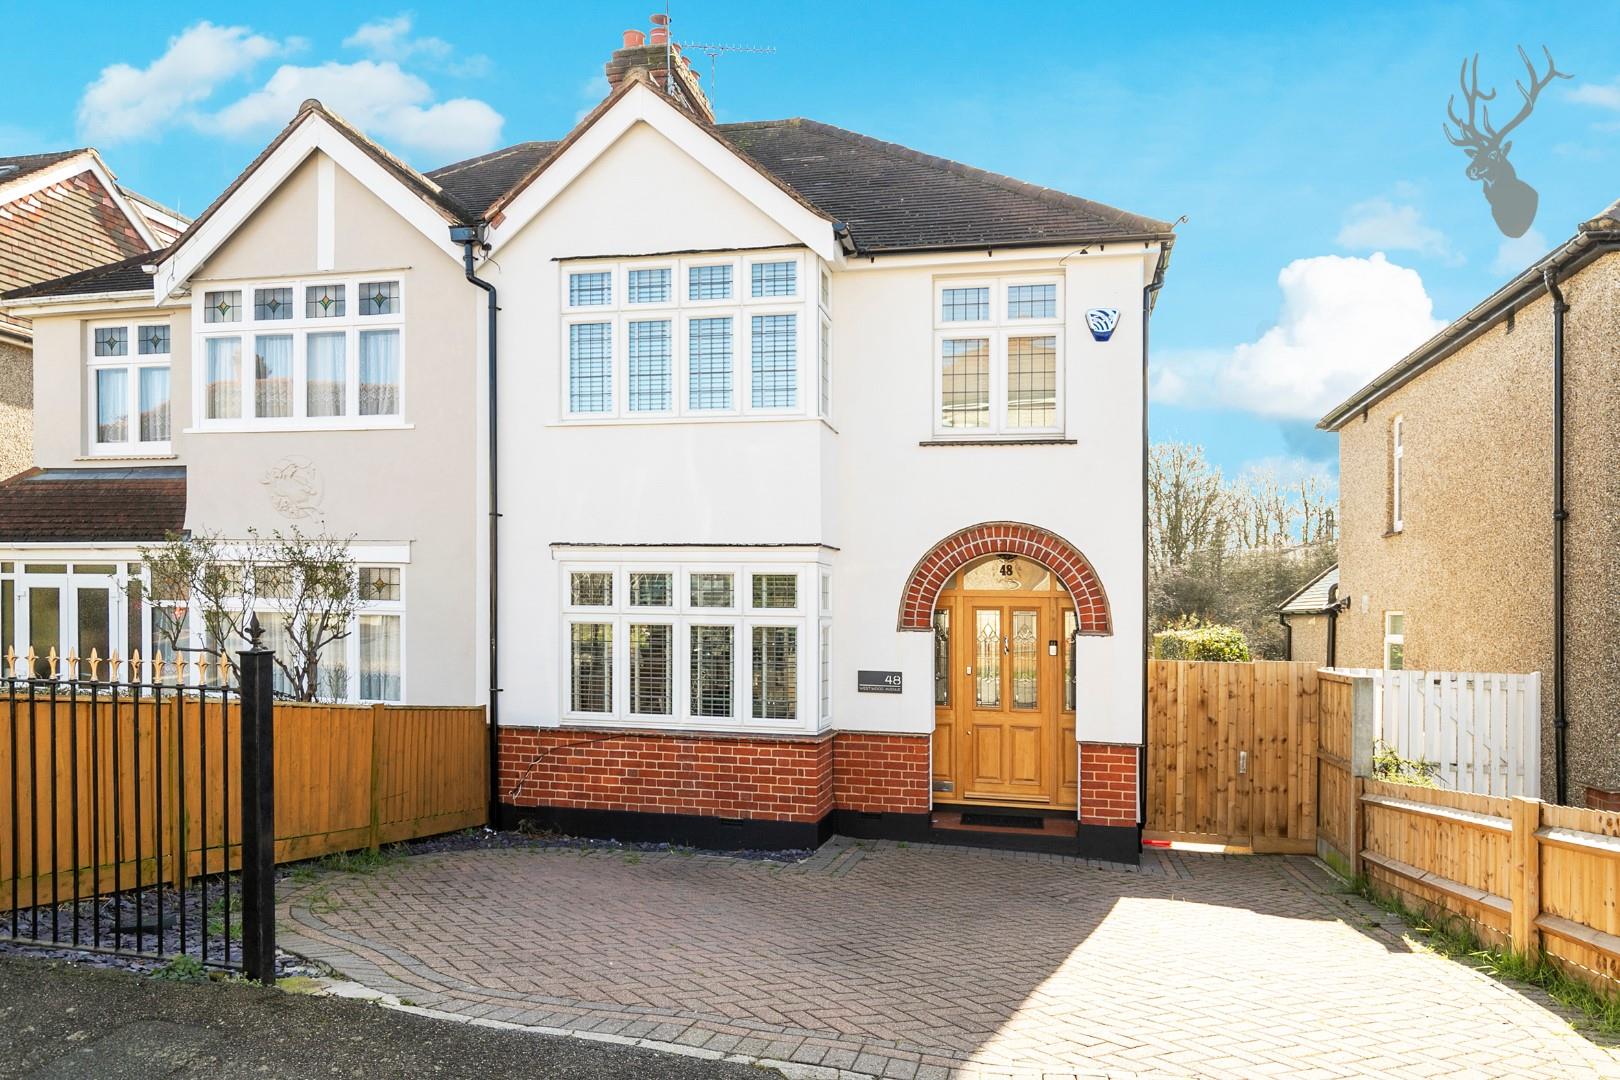 Similar Property: House - Semi-Detached in Brentwood